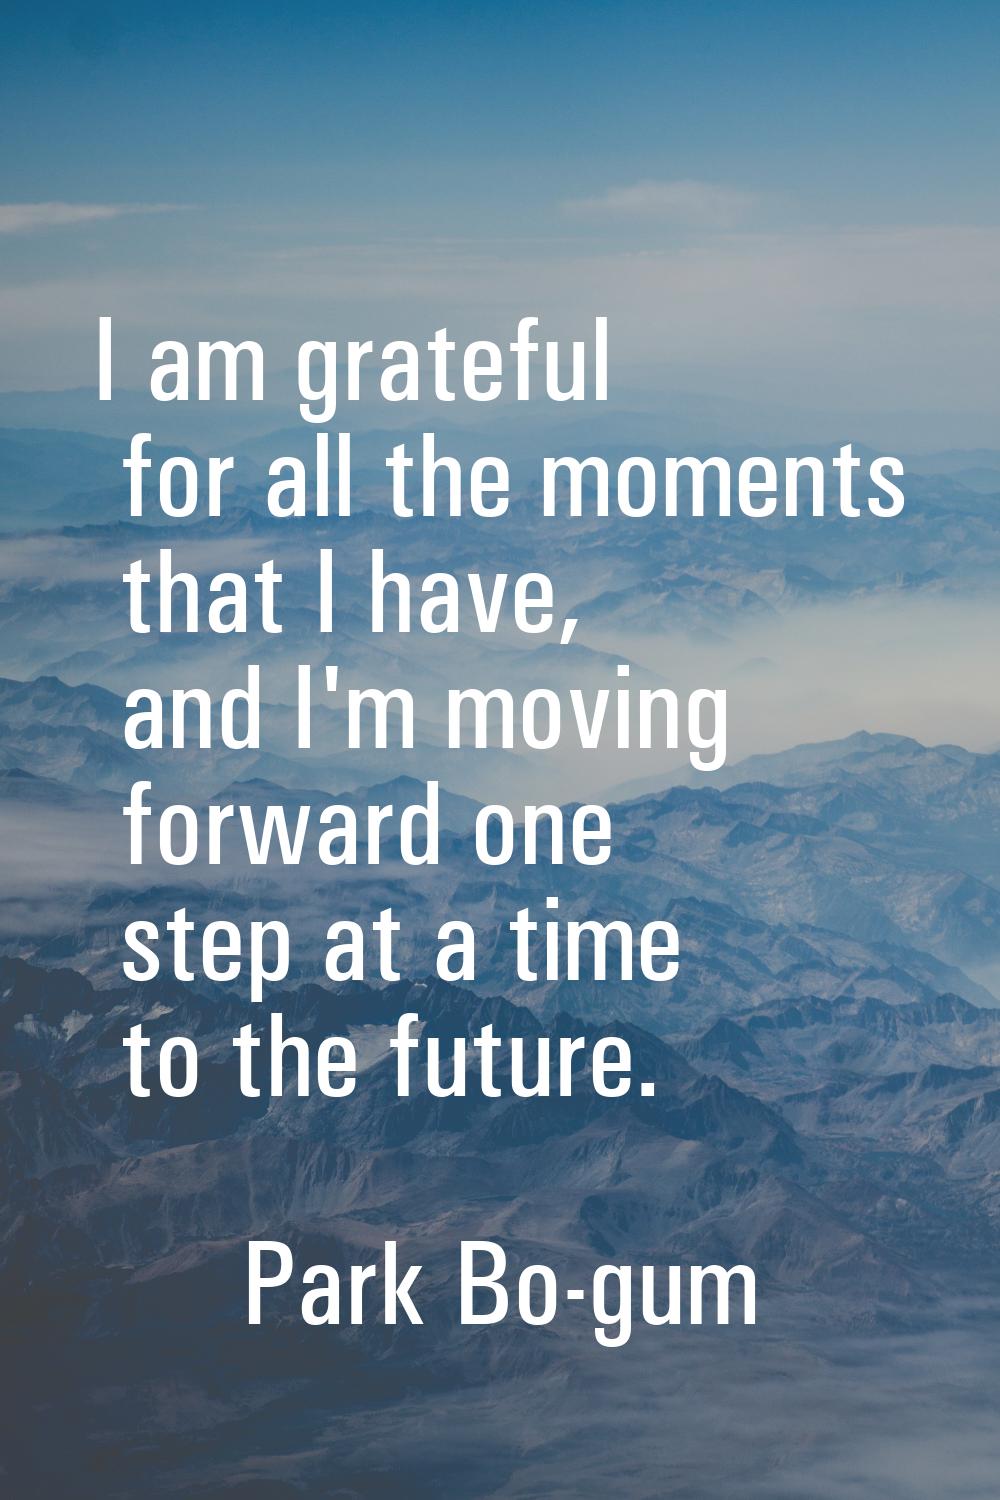 I am grateful for all the moments that I have, and I'm moving forward one step at a time to the fut